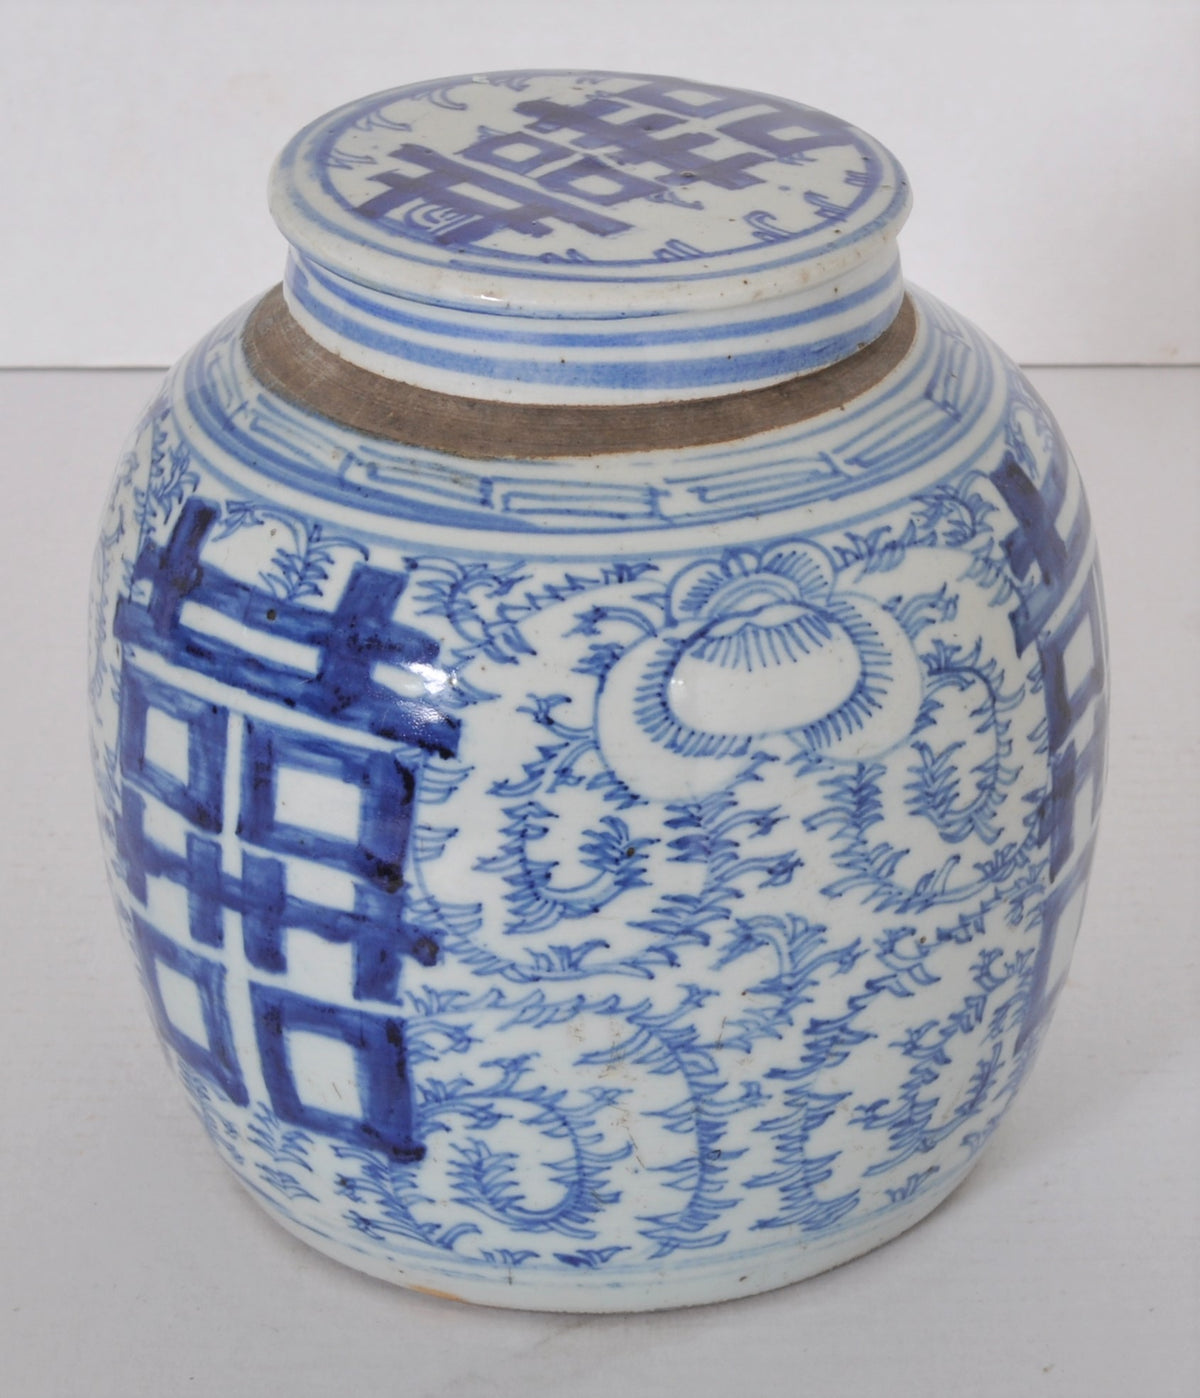 Antique Chinese Qing Dynasty Blue & White Porcelain Ginger Jar with Double Happiness Symbol, Circa 1870